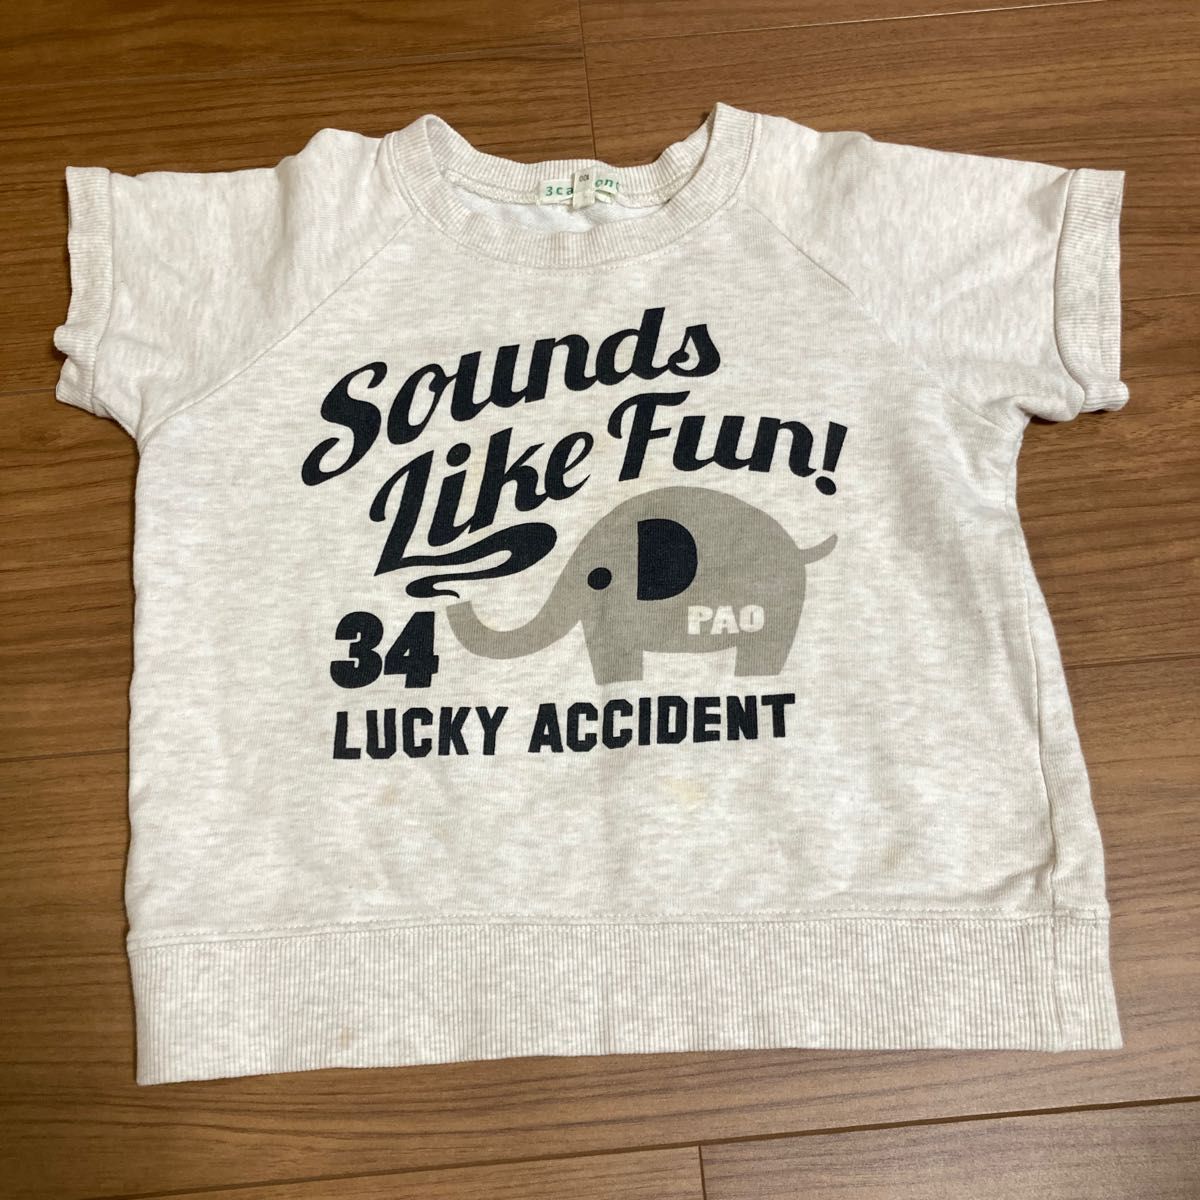 3can4on  半袖　Tシャツ　3枚セット　白　ベージュ　ピンク　100cm まとめ売り